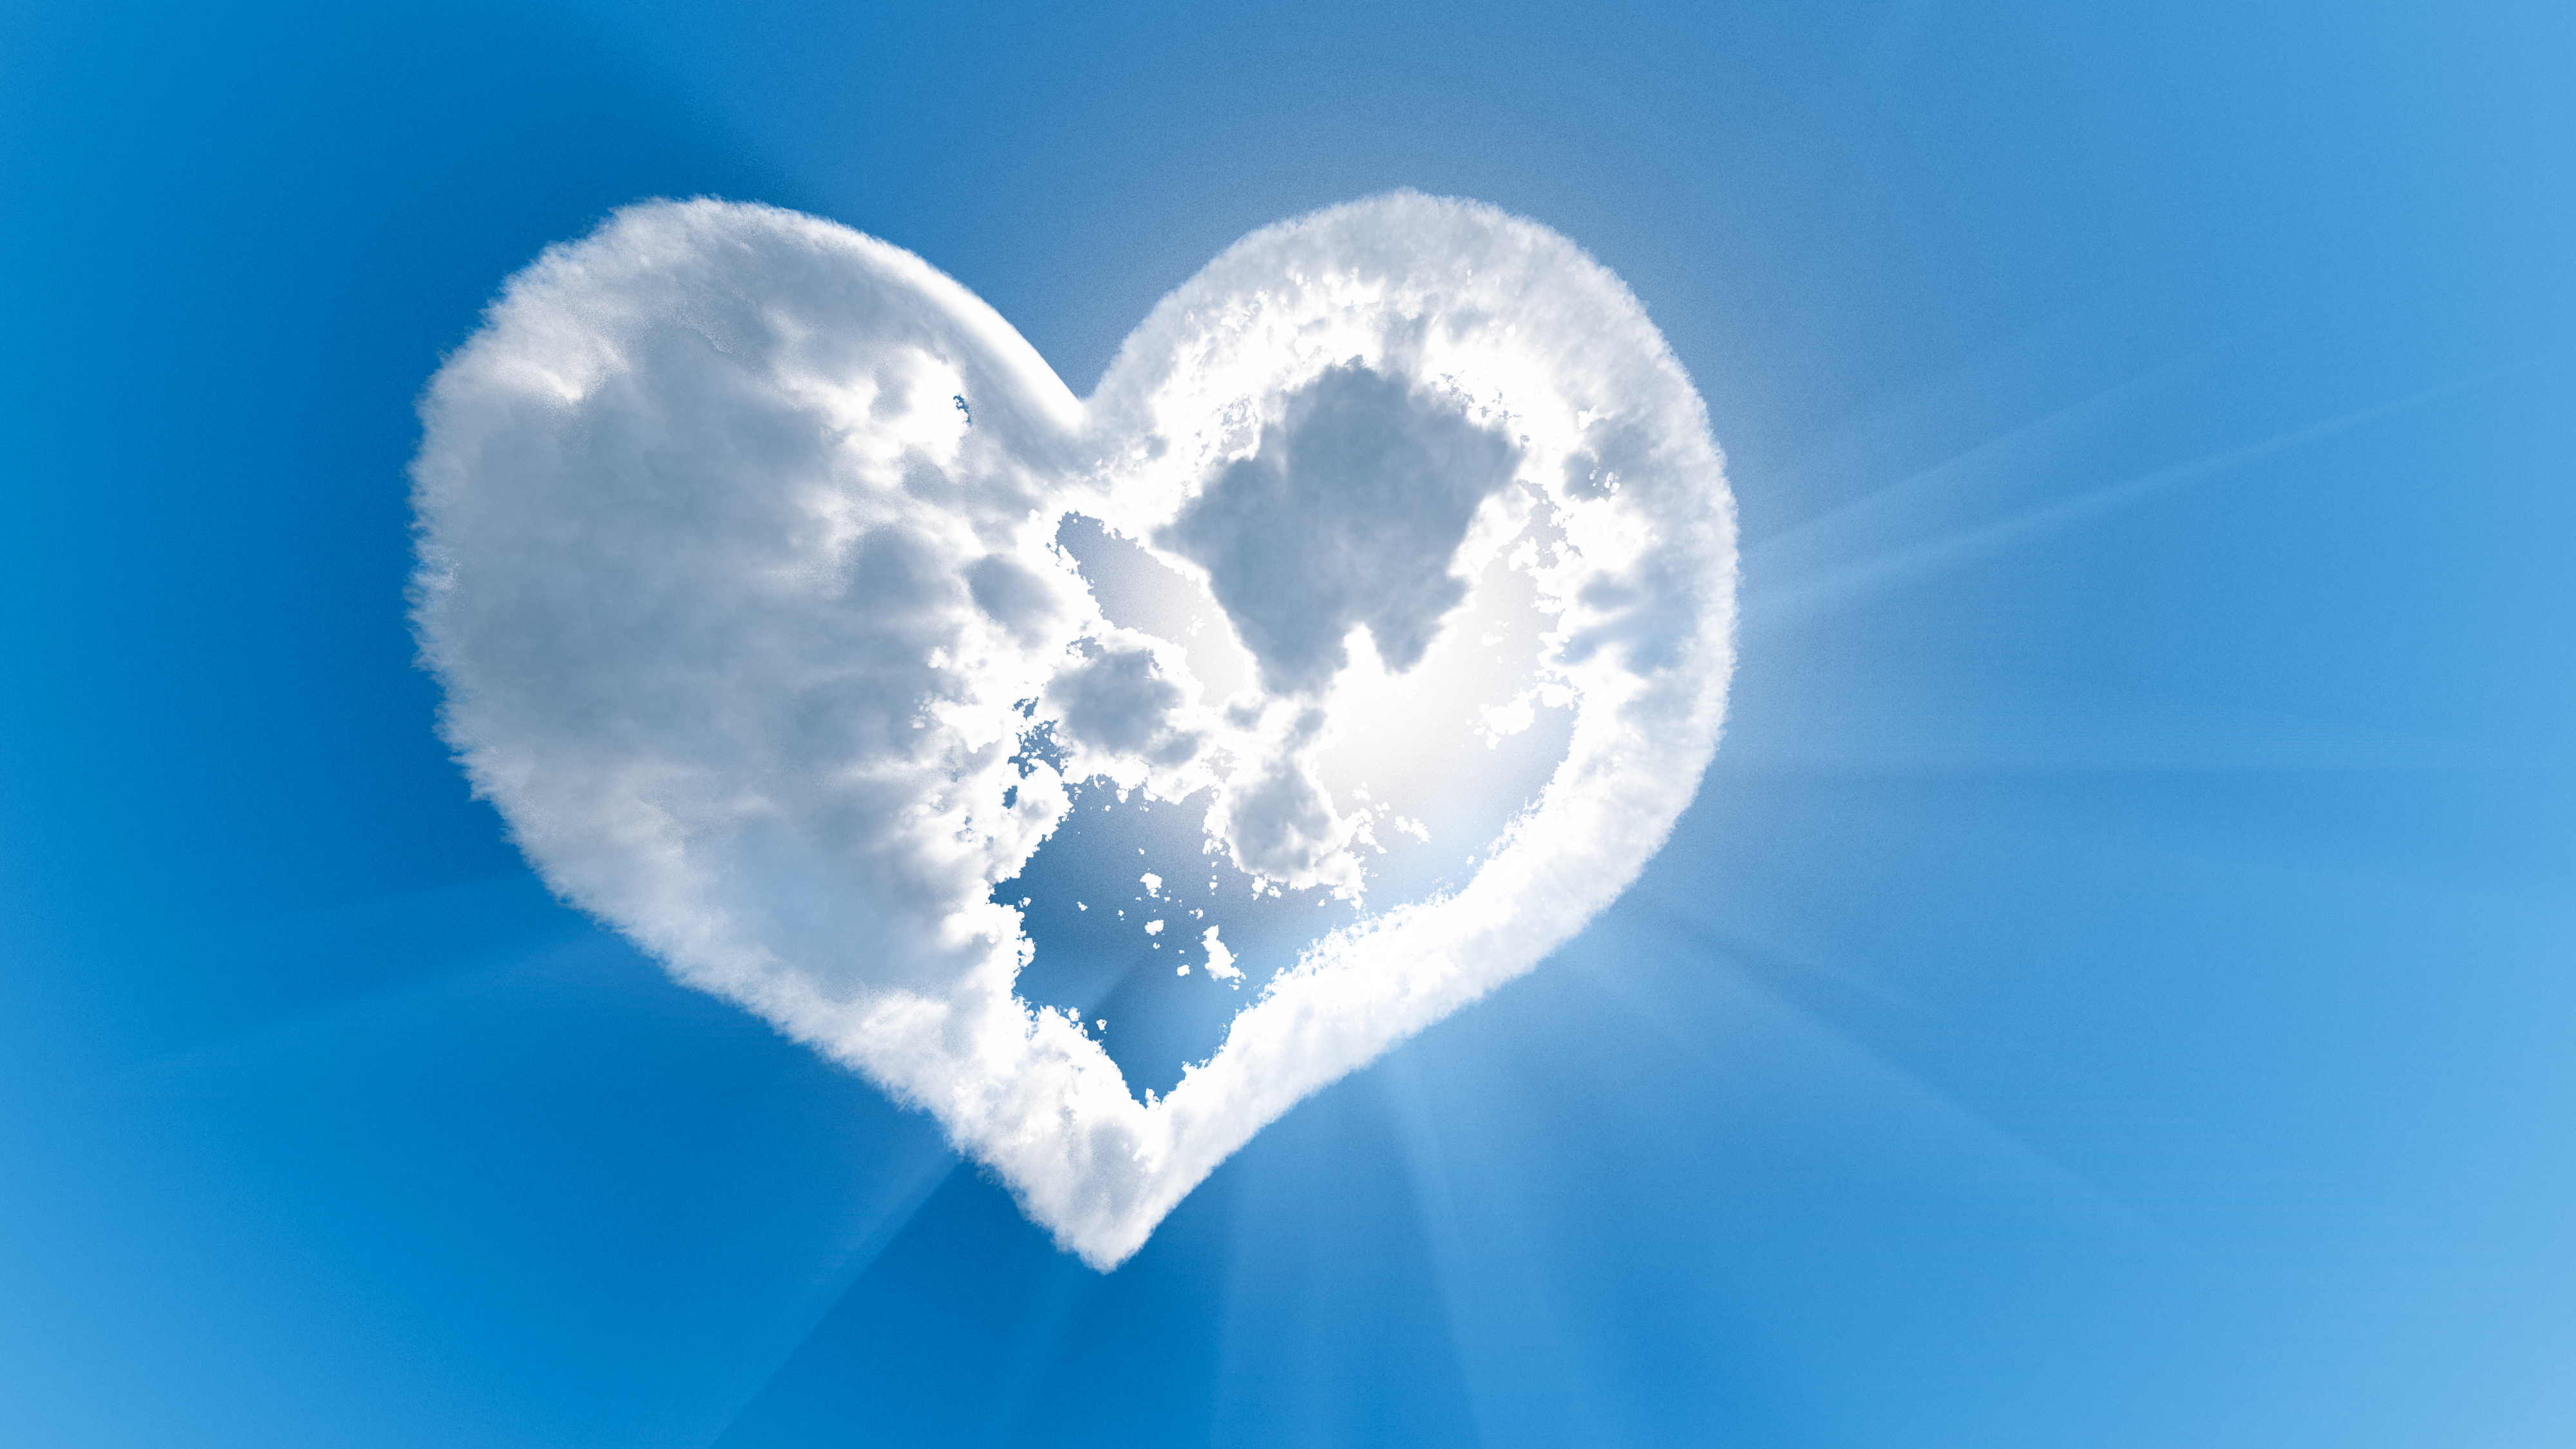 9 uplifting hints to make hearts swell on Blue Monday